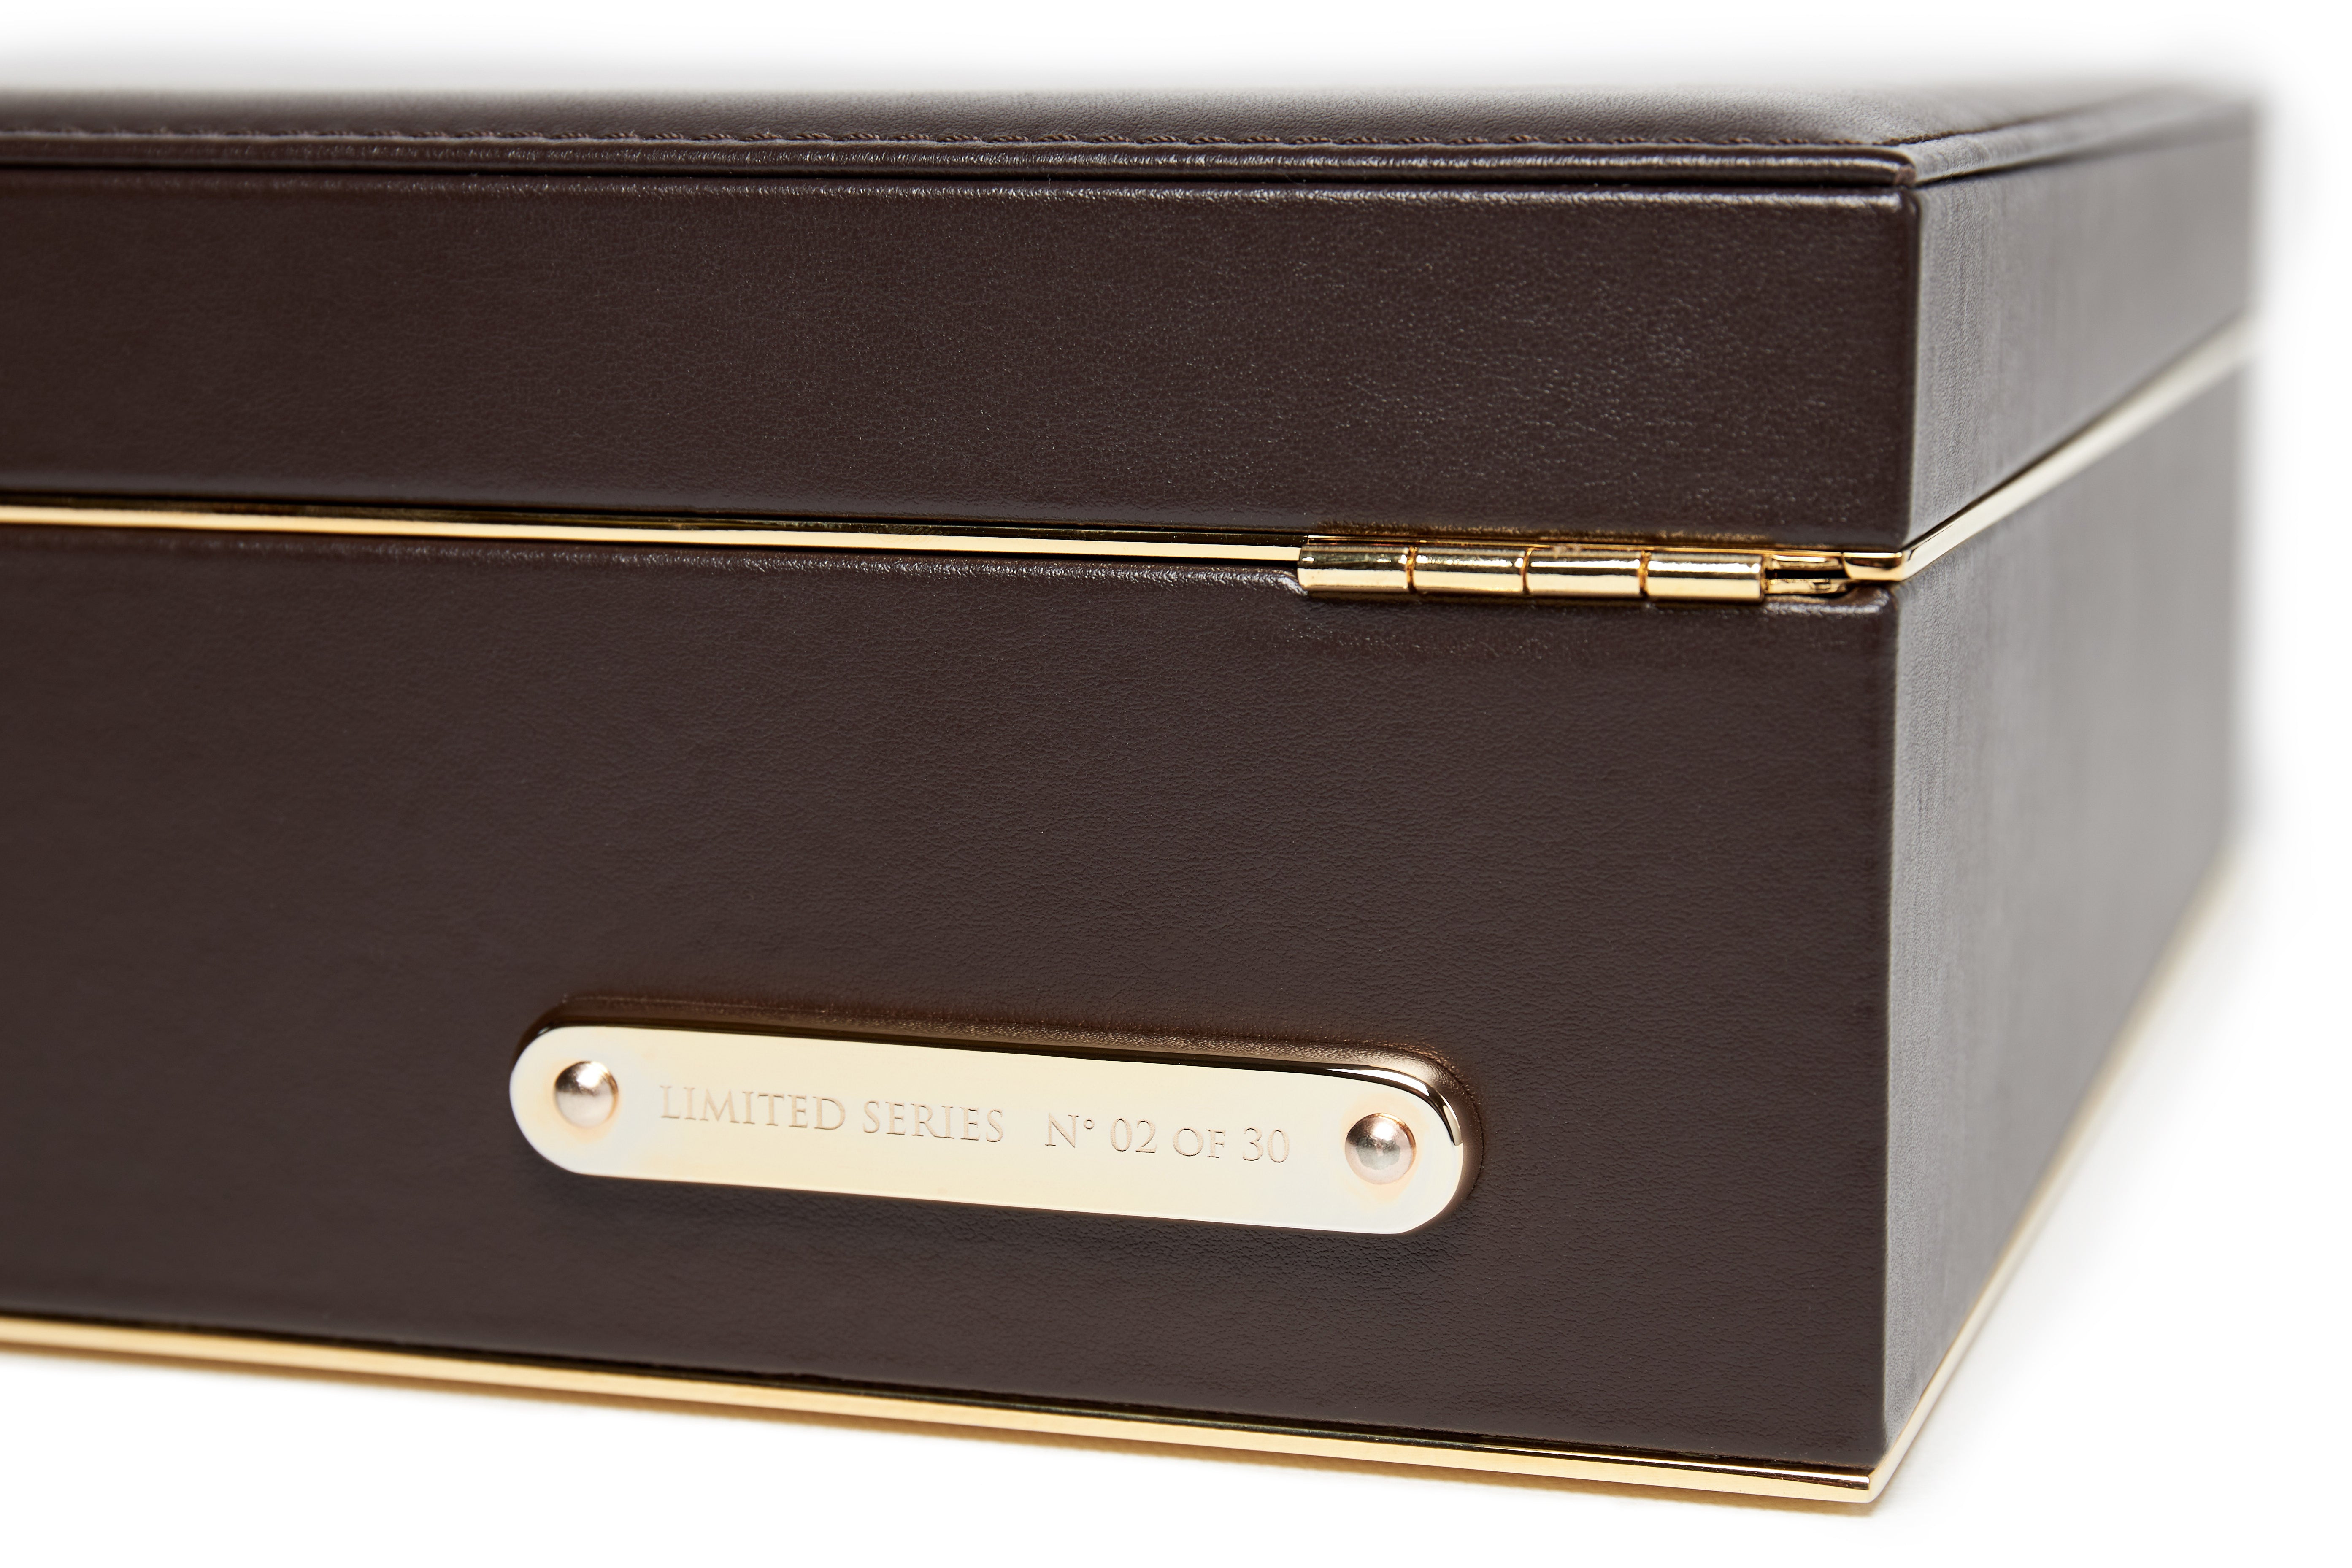 Bernardini Milano Watch Holder - Deep Brown leather and Sand alcantara with yellow gold plated details - limited series target details